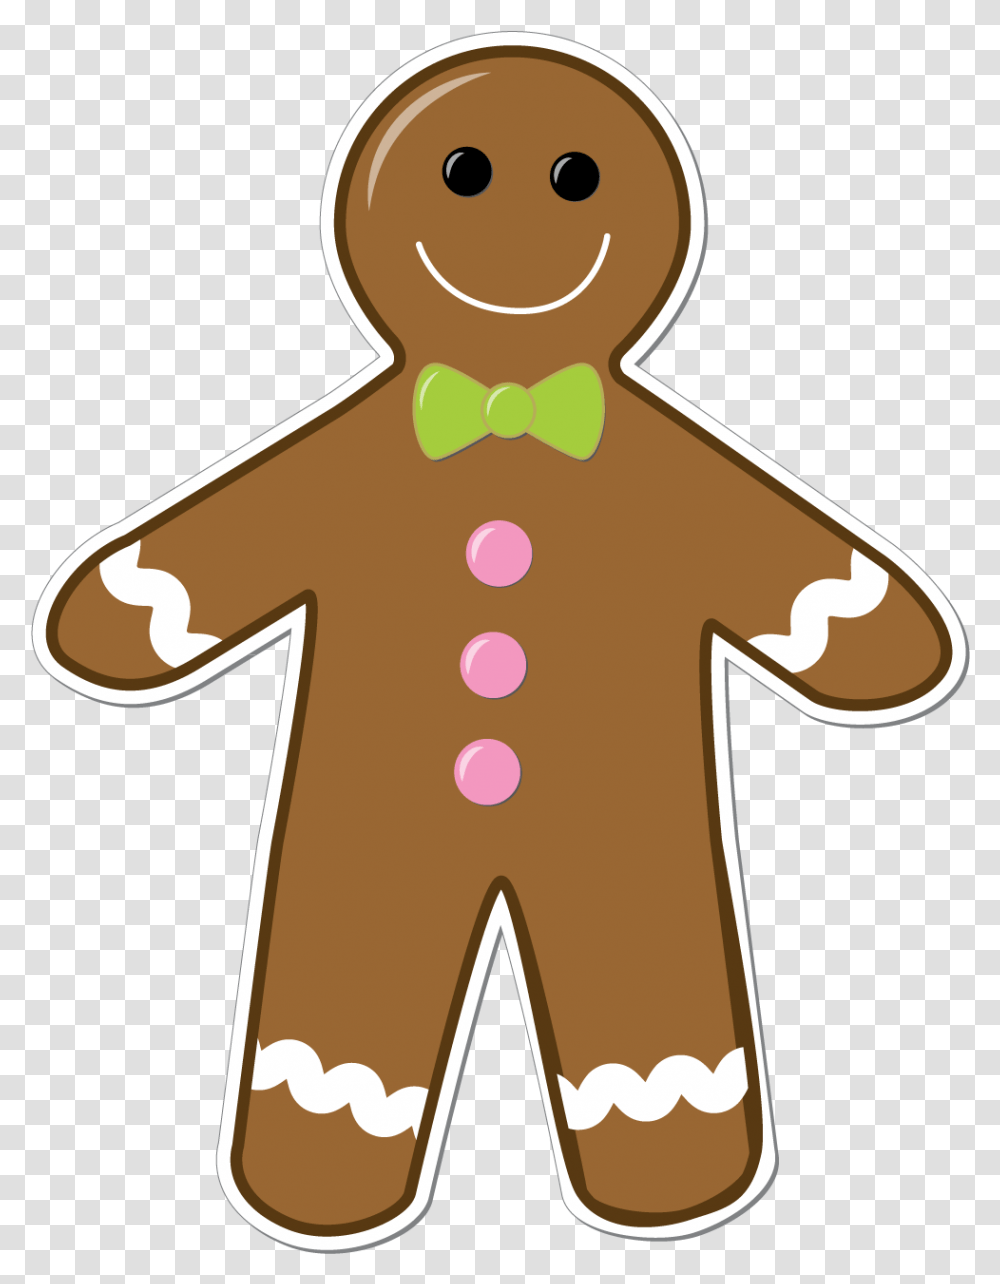 Displaying 18 Images For Gingerbread Man Border Background Gingerbread Man Clipart, Cookie, Food, Biscuit, Cross Transparent Png